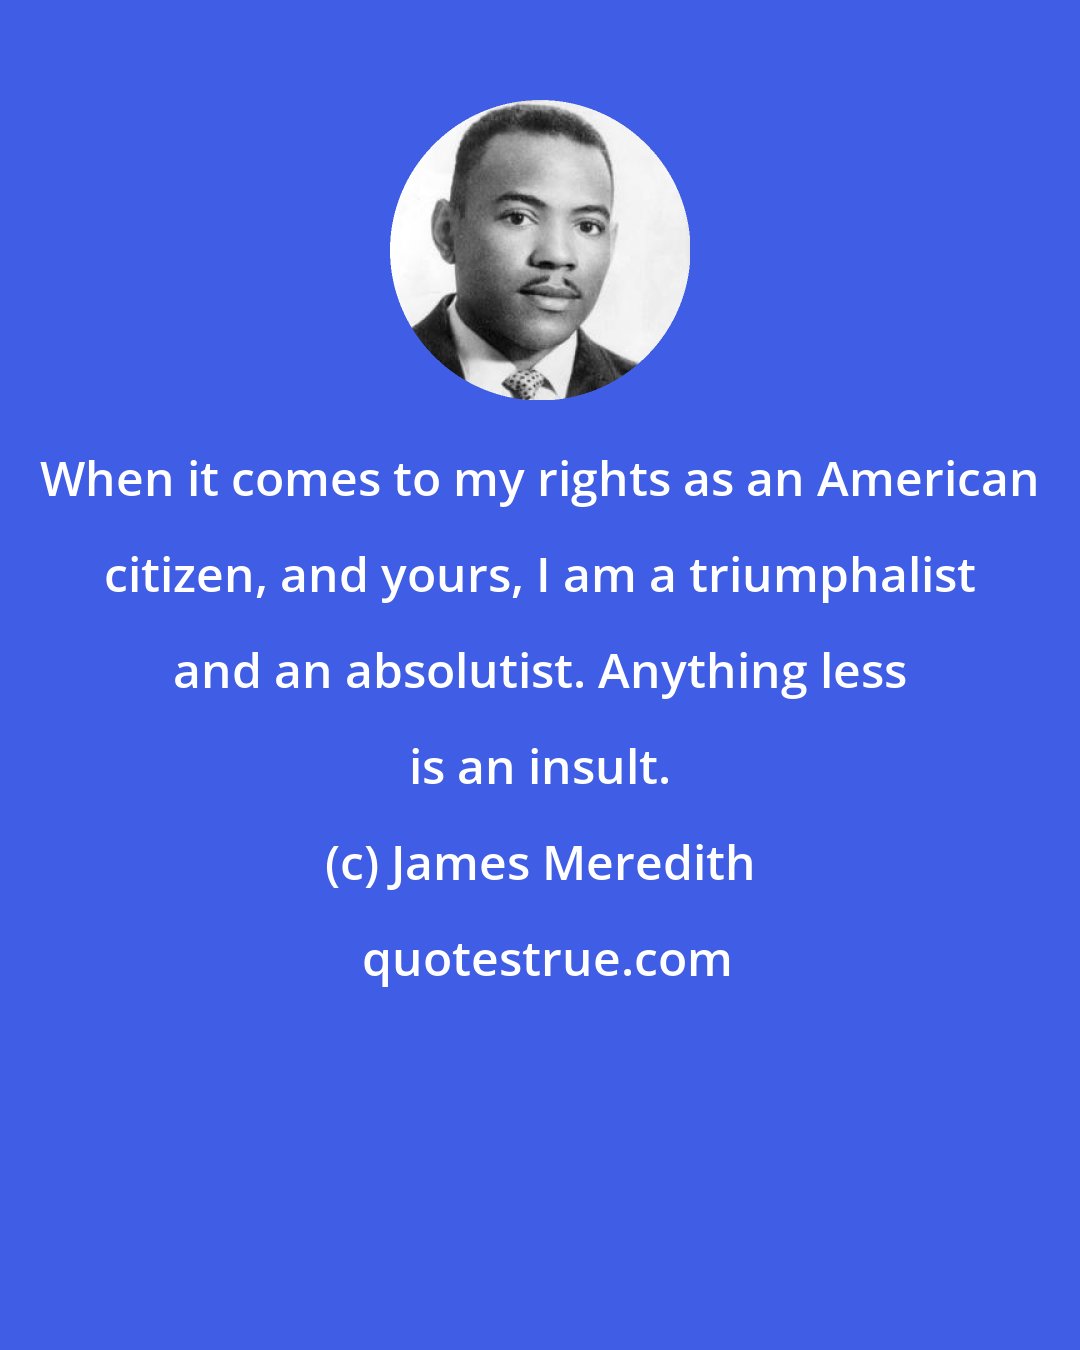 James Meredith: When it comes to my rights as an American citizen, and yours, I am a triumphalist and an absolutist. Anything less is an insult.